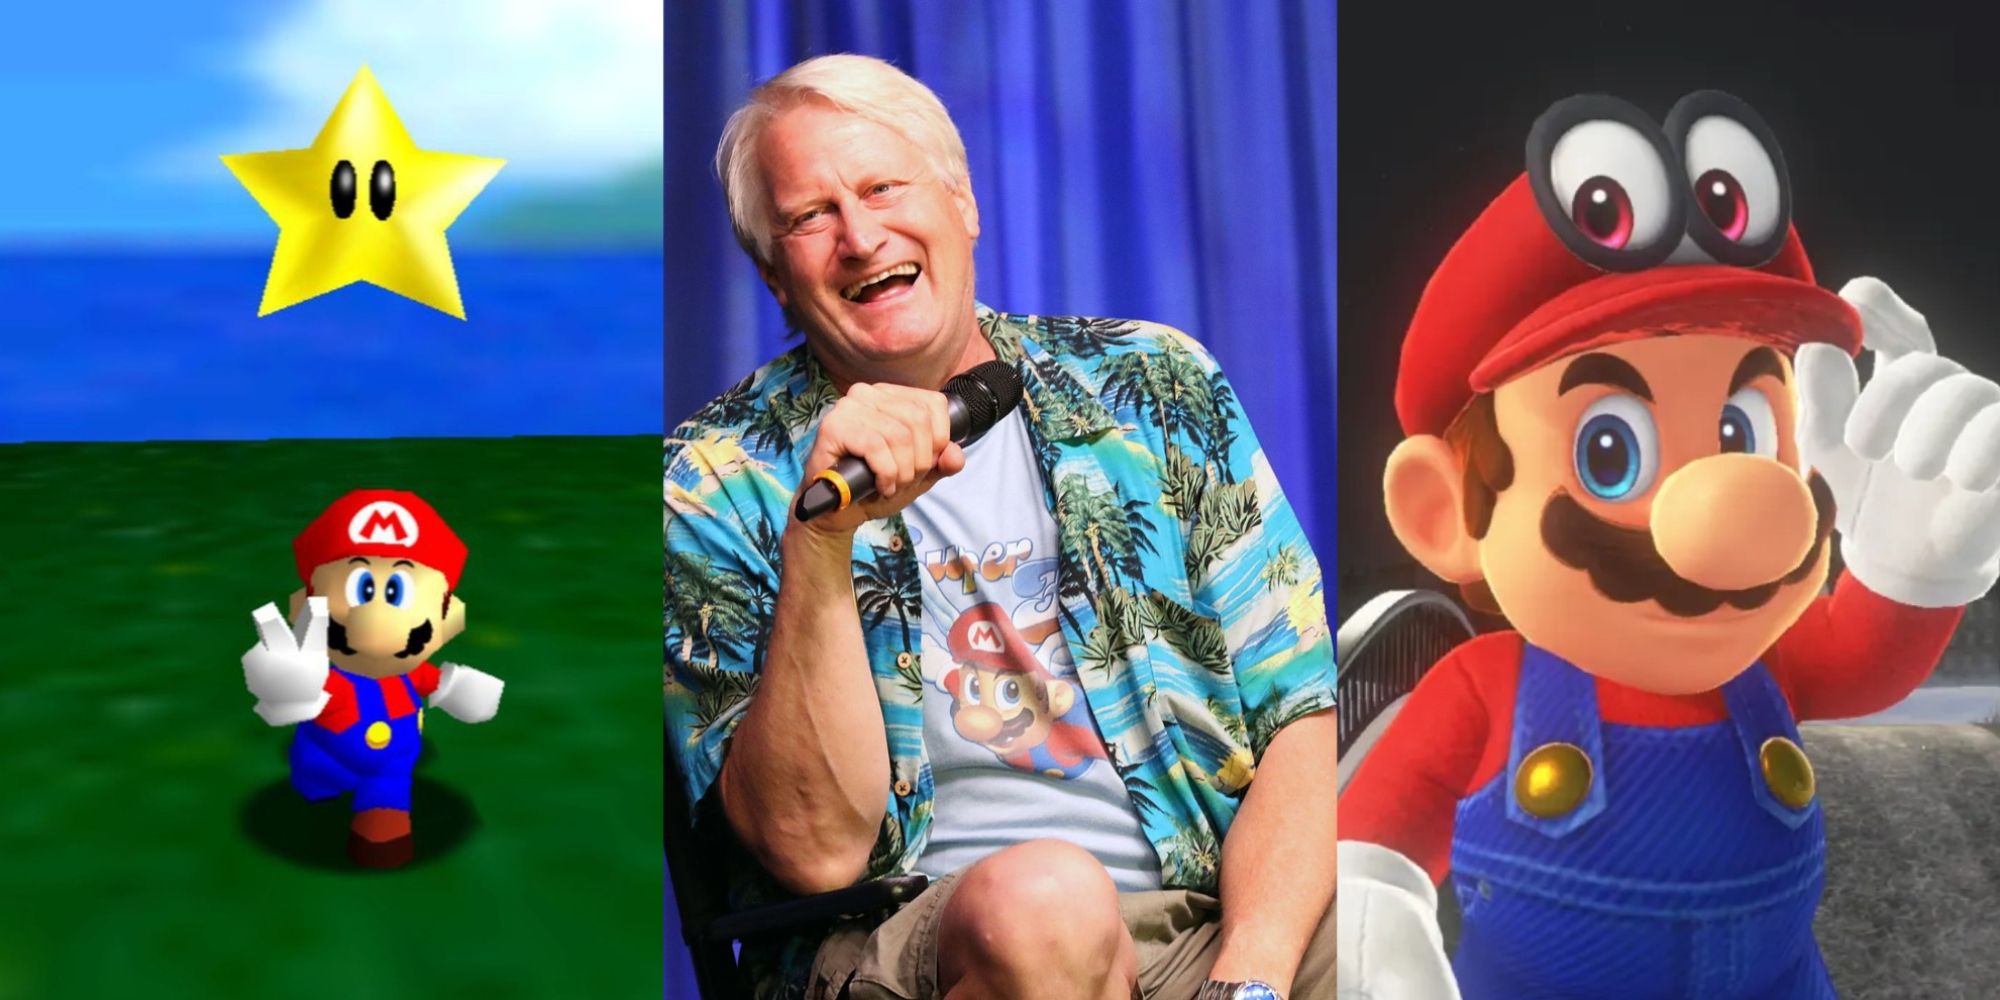 How Long Has Charles Martinet Voiced Mario?